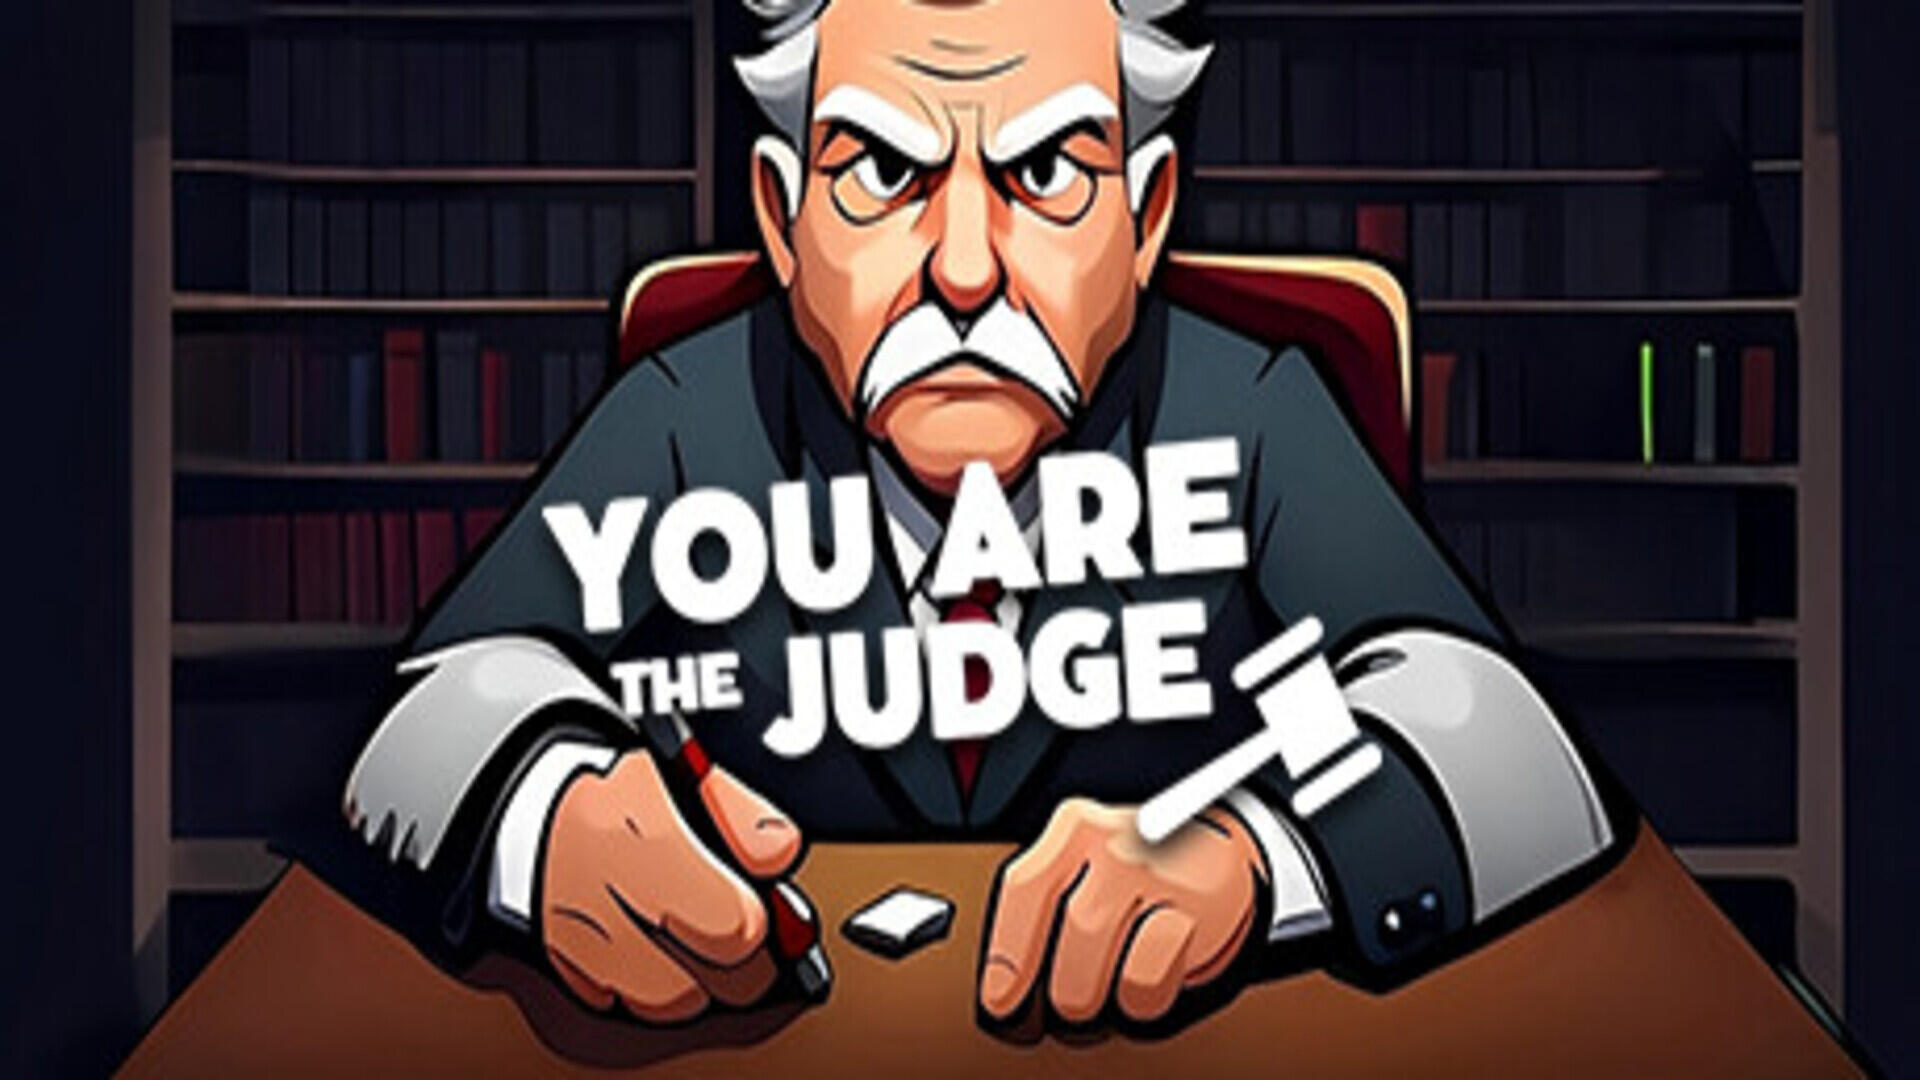 You are the Judge! – Free Download (Build 12336456)